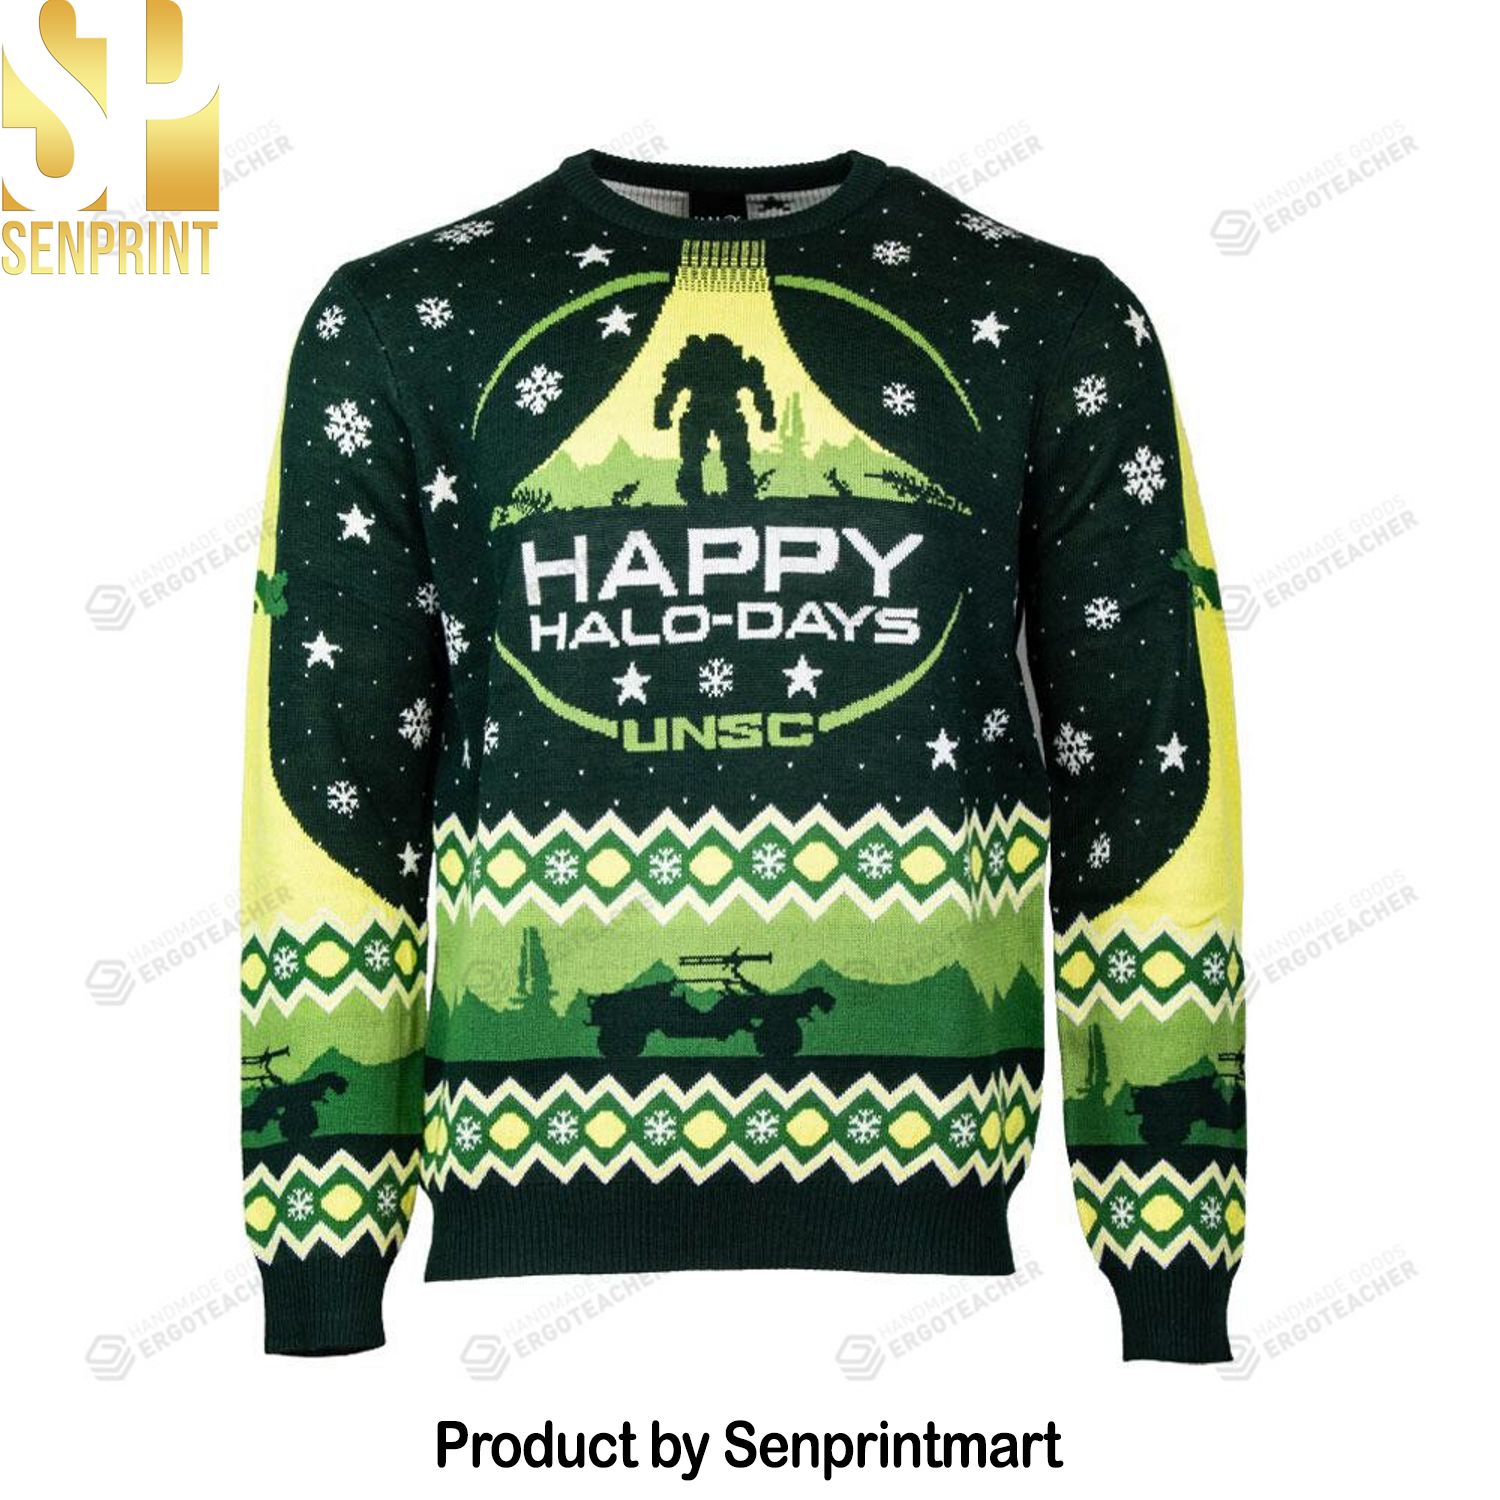 Official Halo ‘Happy Halo-Days’ Christmas Ugly Wool Knitted Sweater